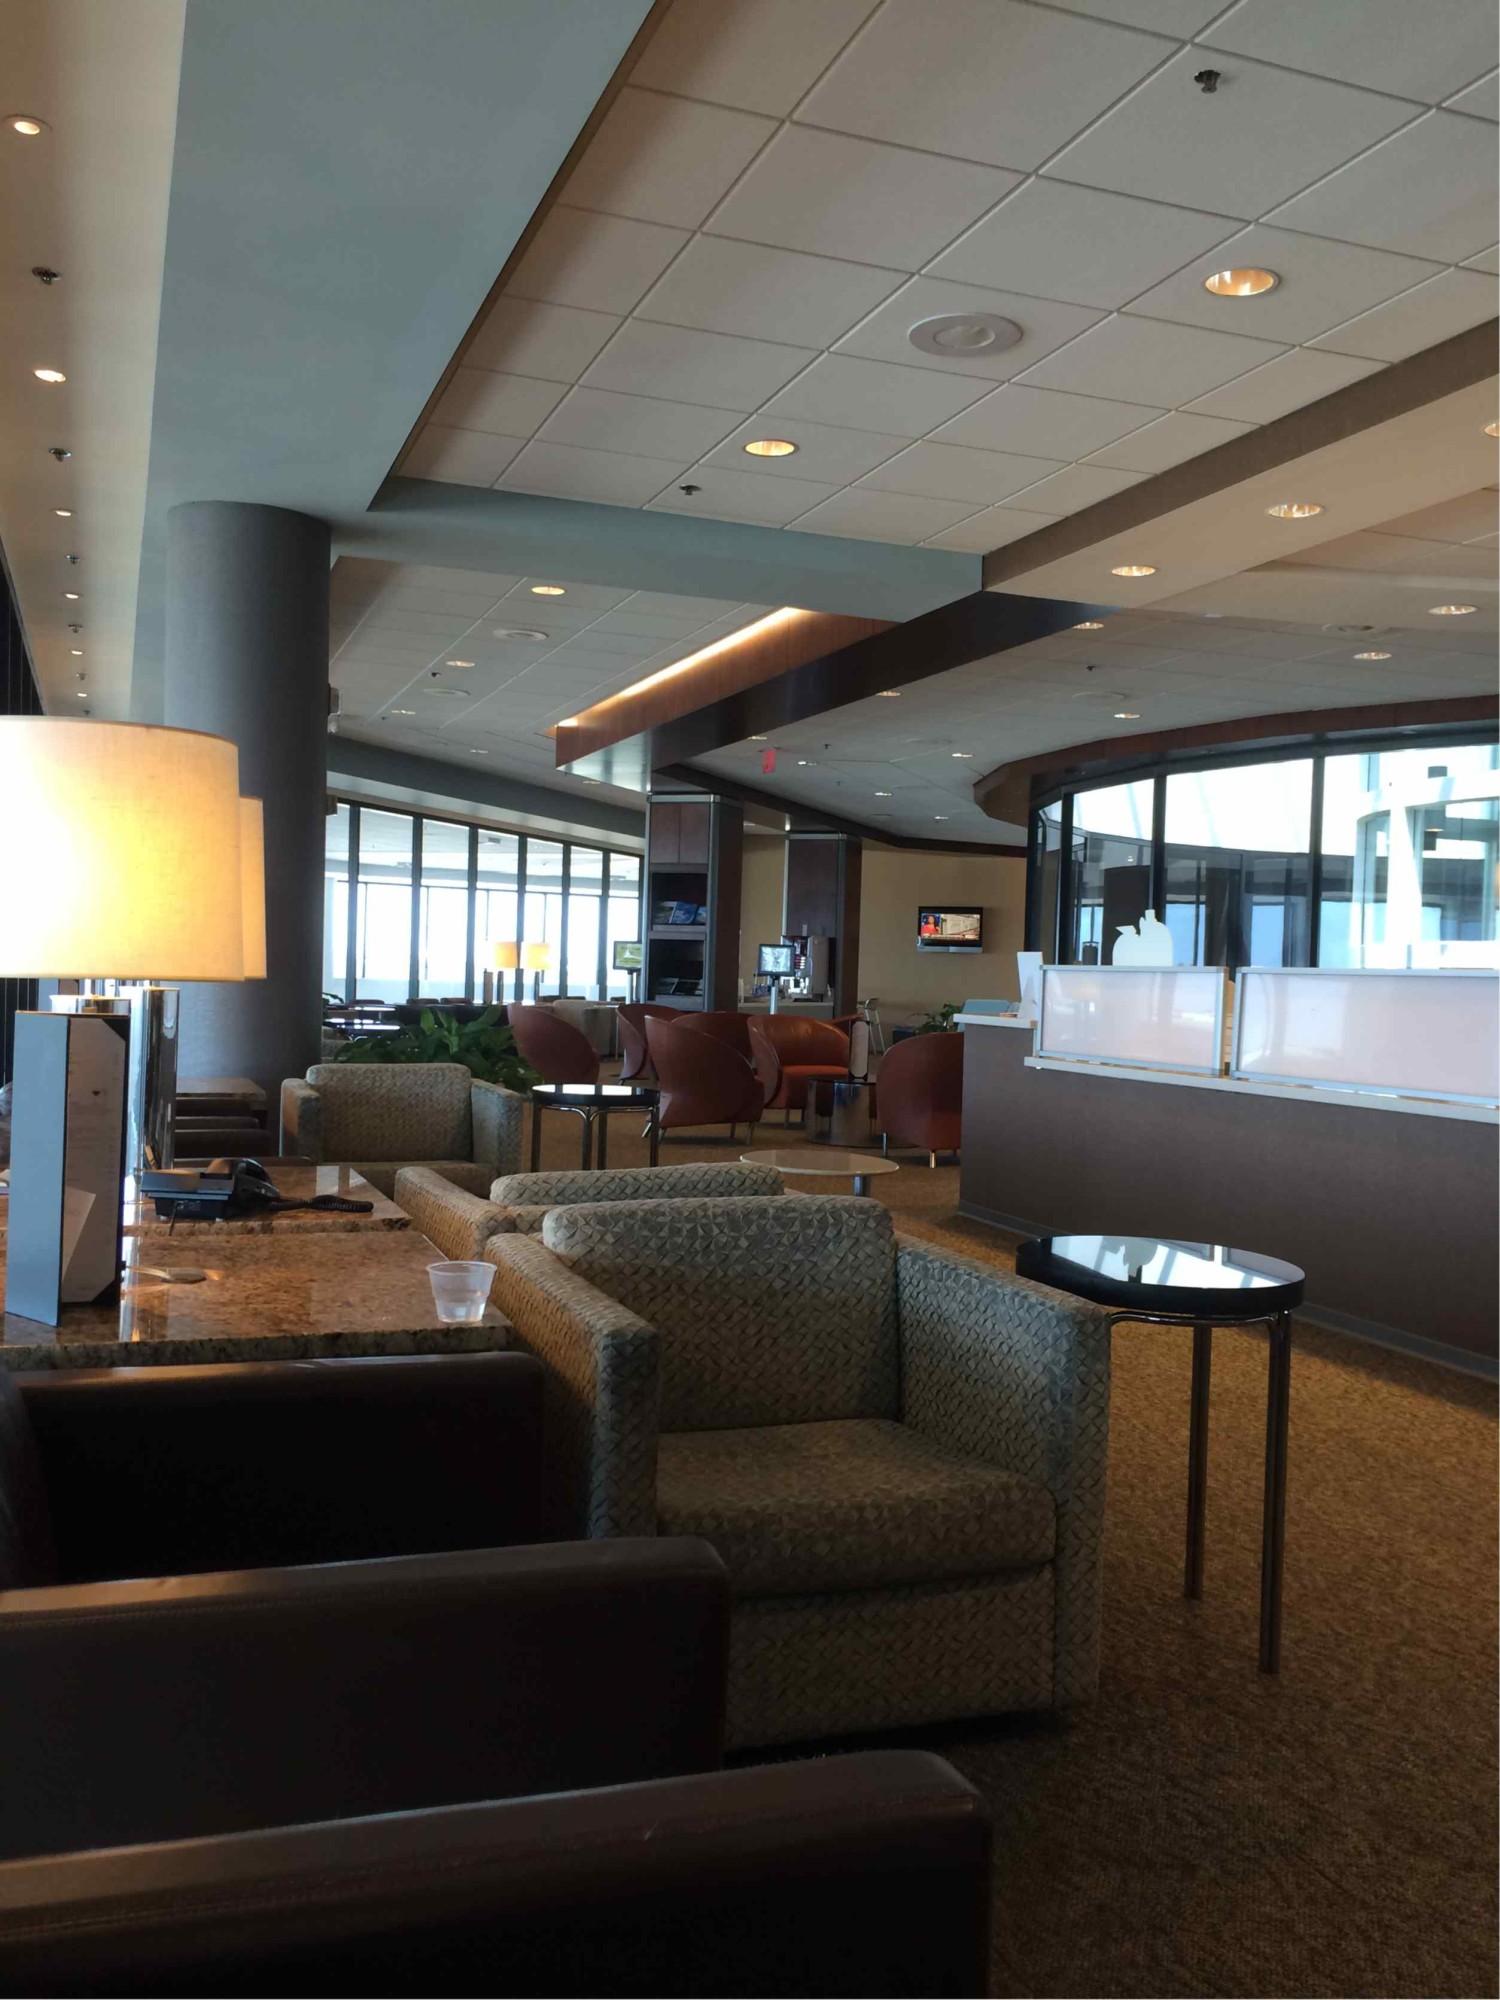 American Airlines Admirals Club image 3 of 16